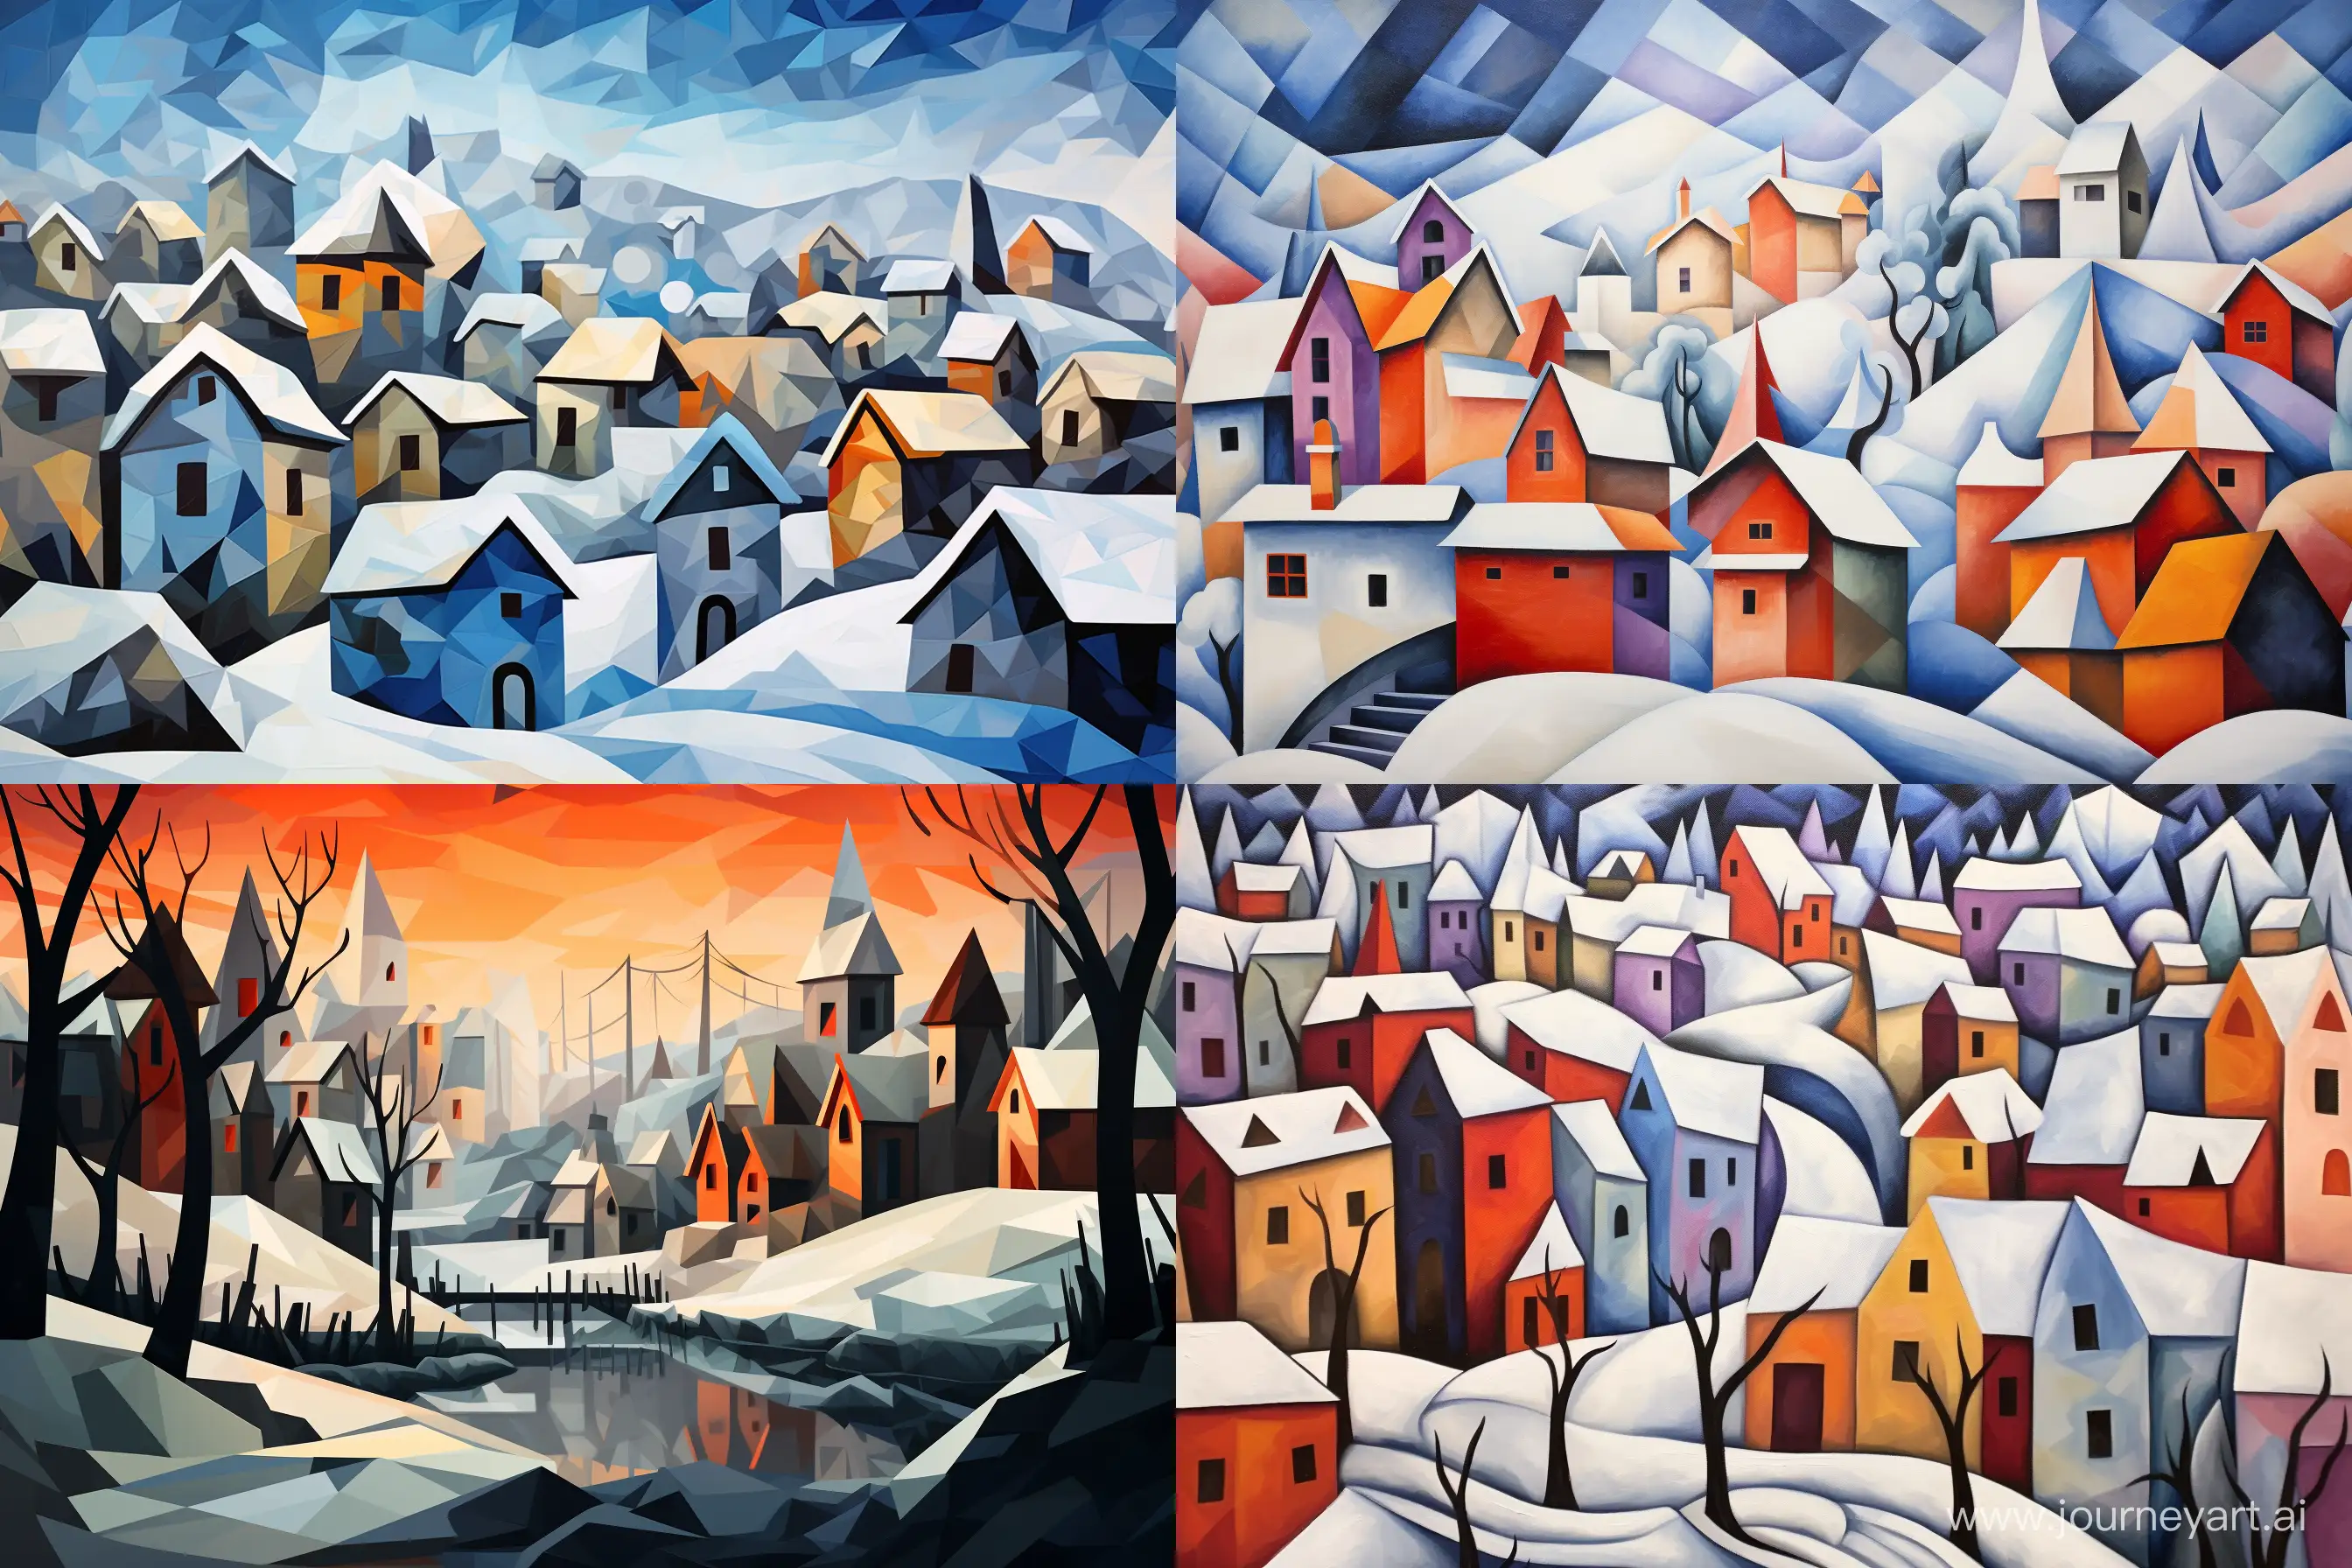 Snowy-Village-Cubism-Art-Abstract-Winter-Scene-in-32-Aspect-Ratio